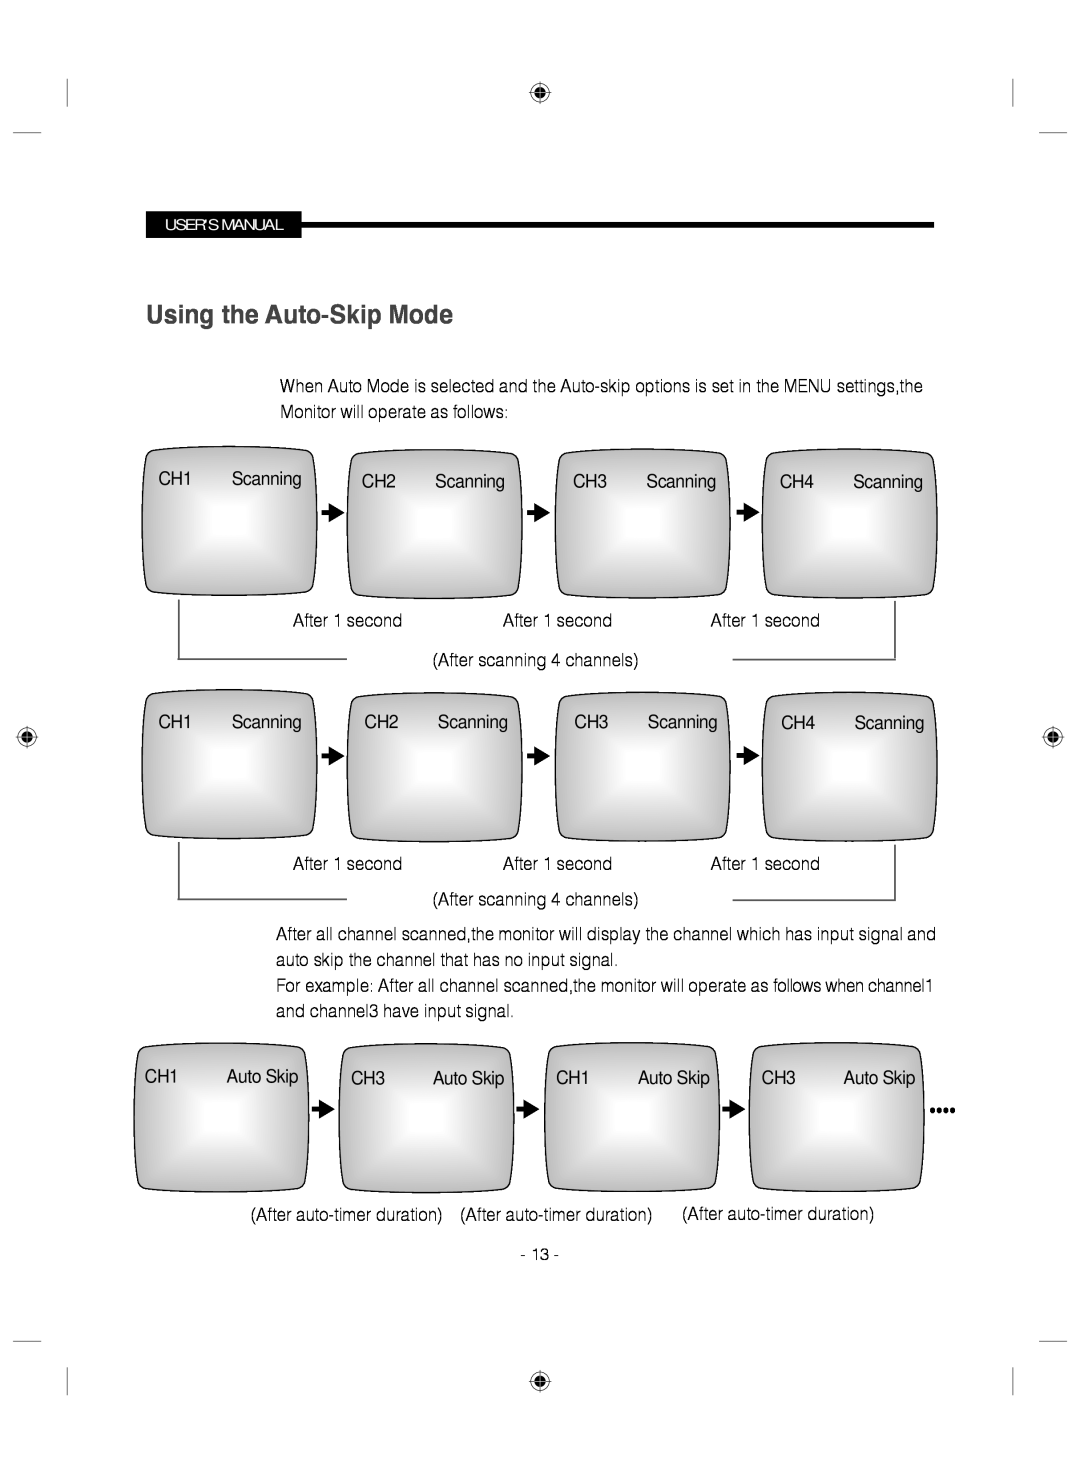 Samsung SMC-145 manual x x, Using the Auto-Skip Mode, After scanning 4 channels 